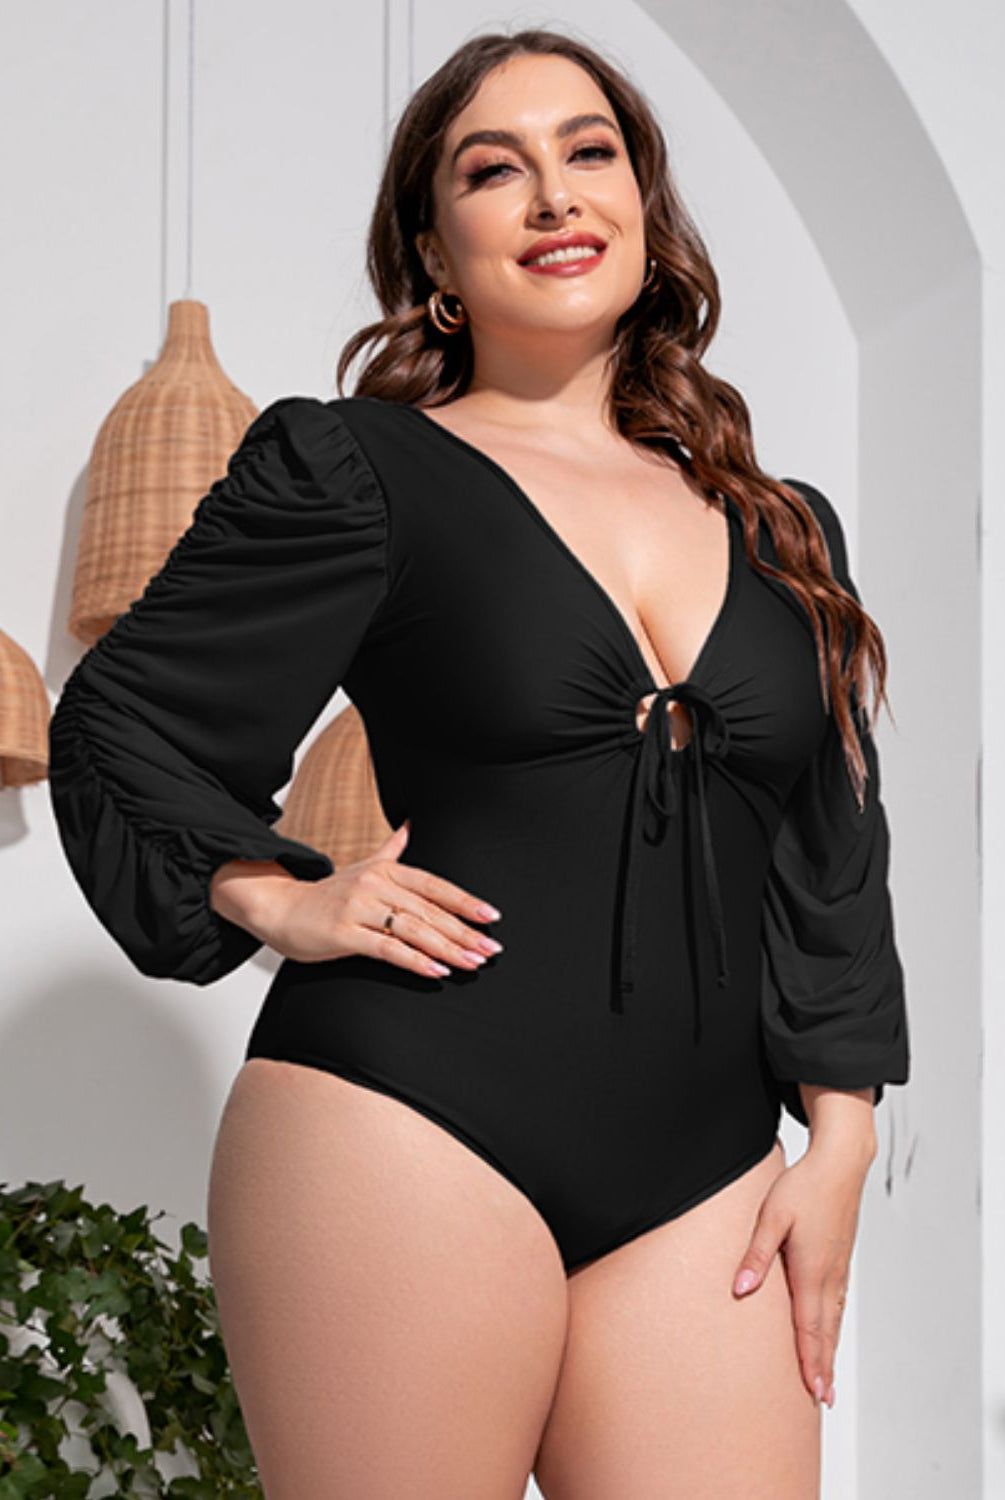 Black Plus Size Tied Deep V Balloon Sleeve One-Piece Swimsuit Plus Size Clothes